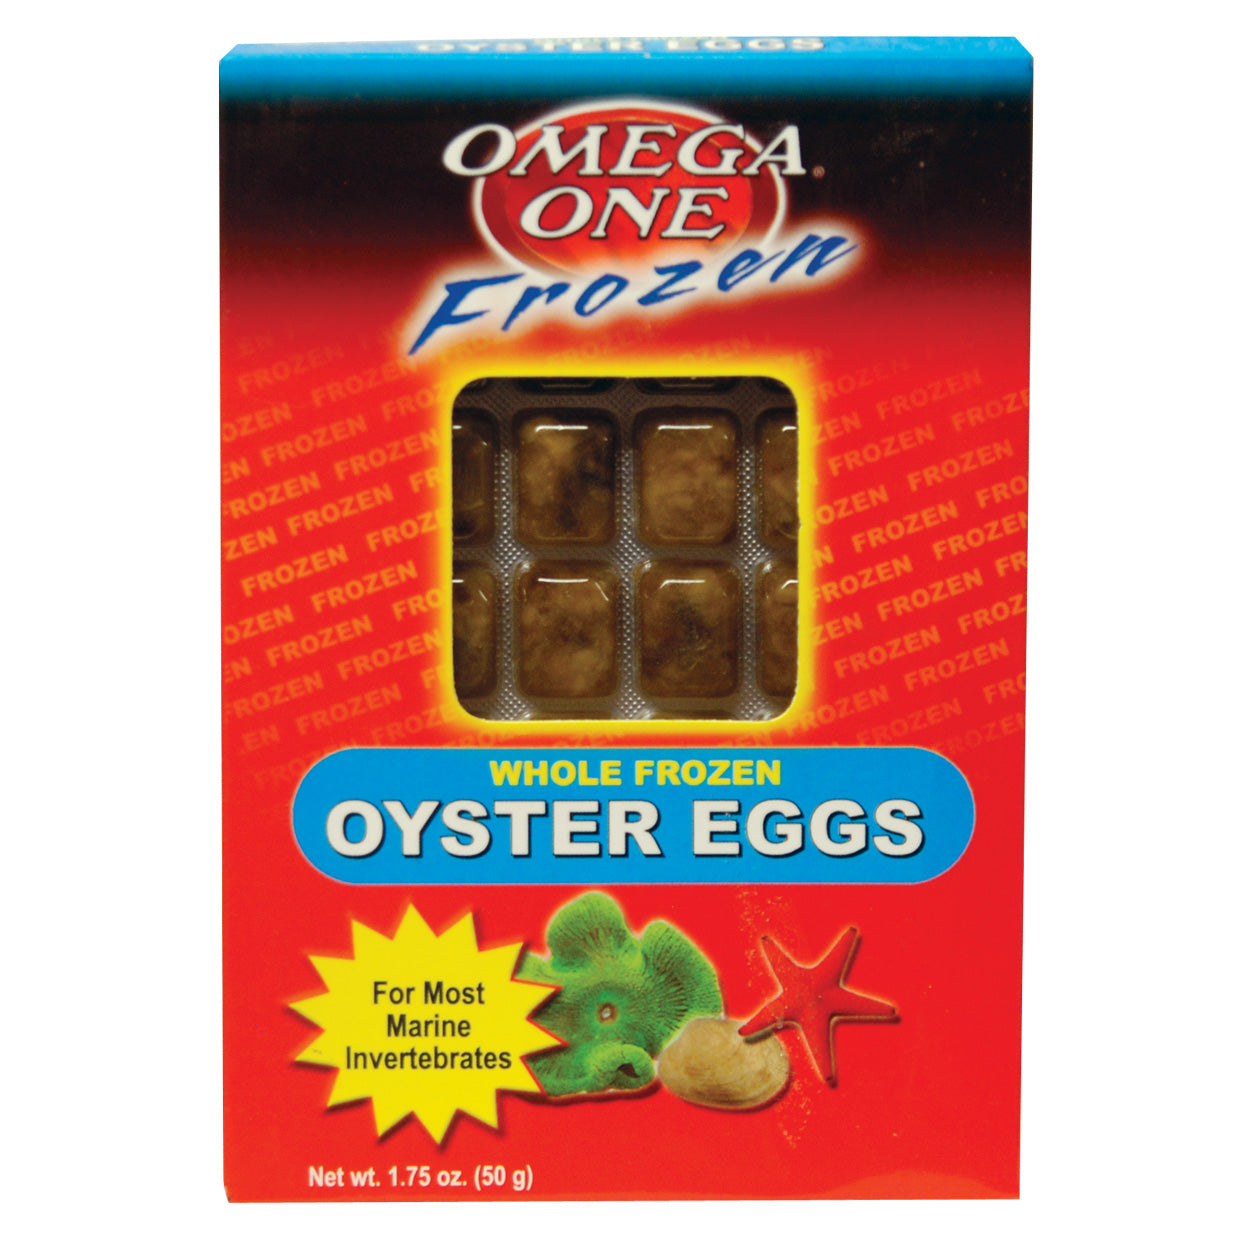 Omega One Frozen Oyster Eggs